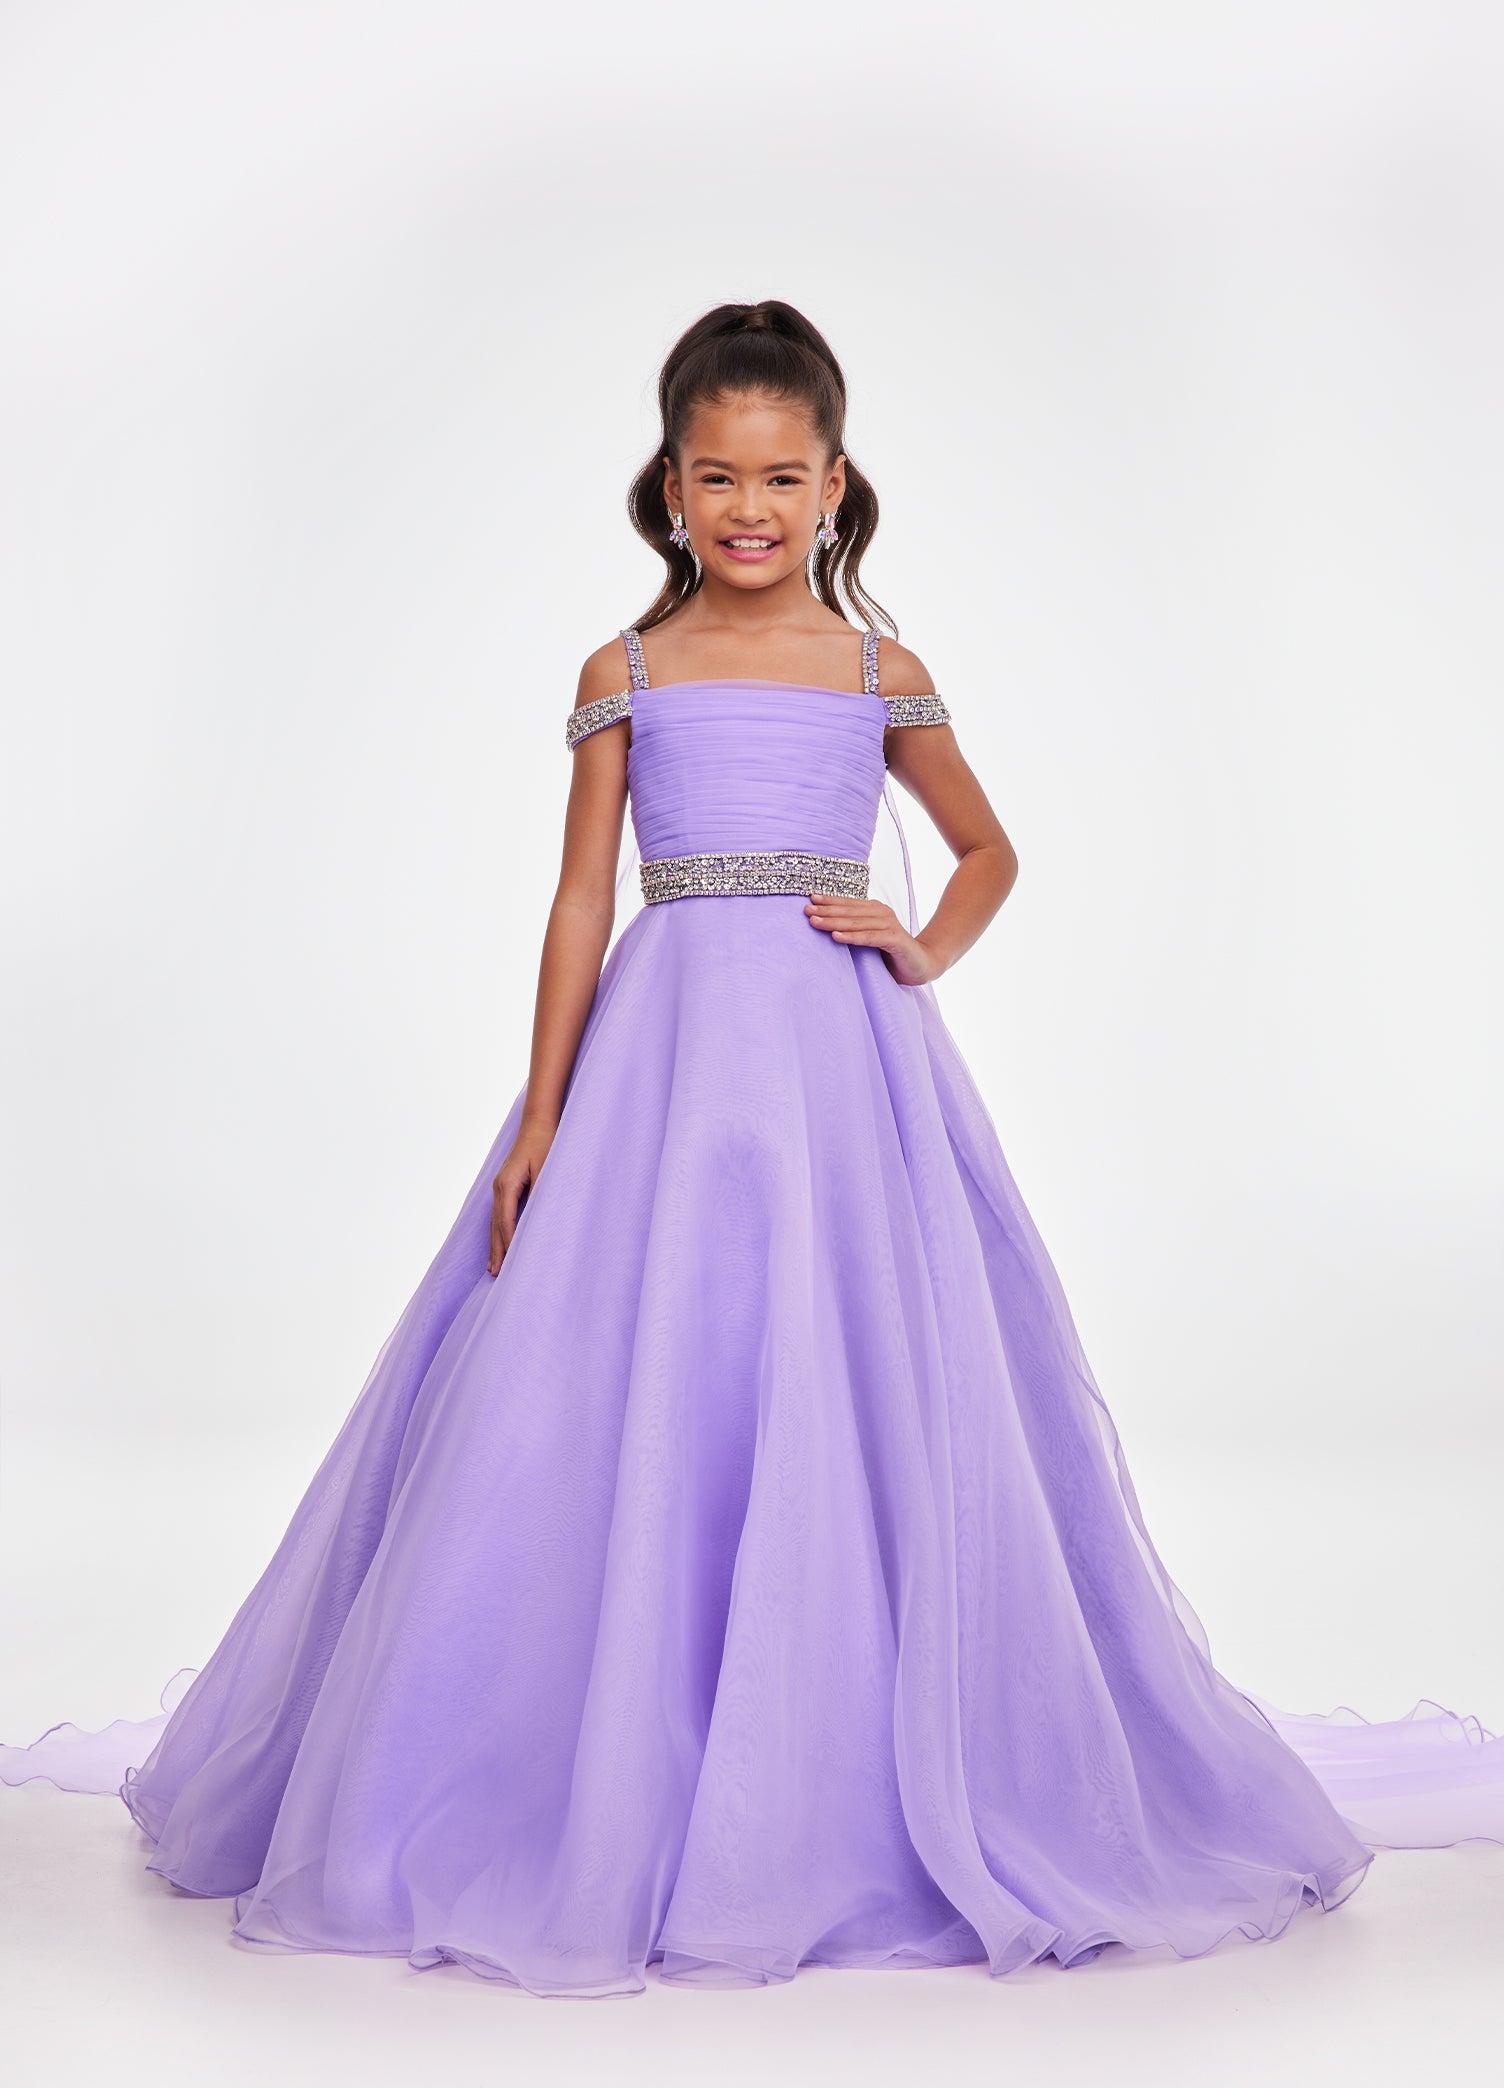 Ashley Lauren Kids 8094 Long off the shoulder A Line Pageant Ball Gown Pageant Dress We are obsessed with this kids evening gown! This organza ball gown features crystal encrusted straps giving way to a ruched bustier. The same crystal detail accents the elegant beaded belt. The look is completed with an A-Line skirt and attached organza cape. Ruched Bustier Crystal Strap &amp; Belt Organza Ball Gown Skirt Organza Cape Available Sizes: 4-14 Available Colors: Neon Orange, Orchid, Hot Pink, Turquoise, Ivory